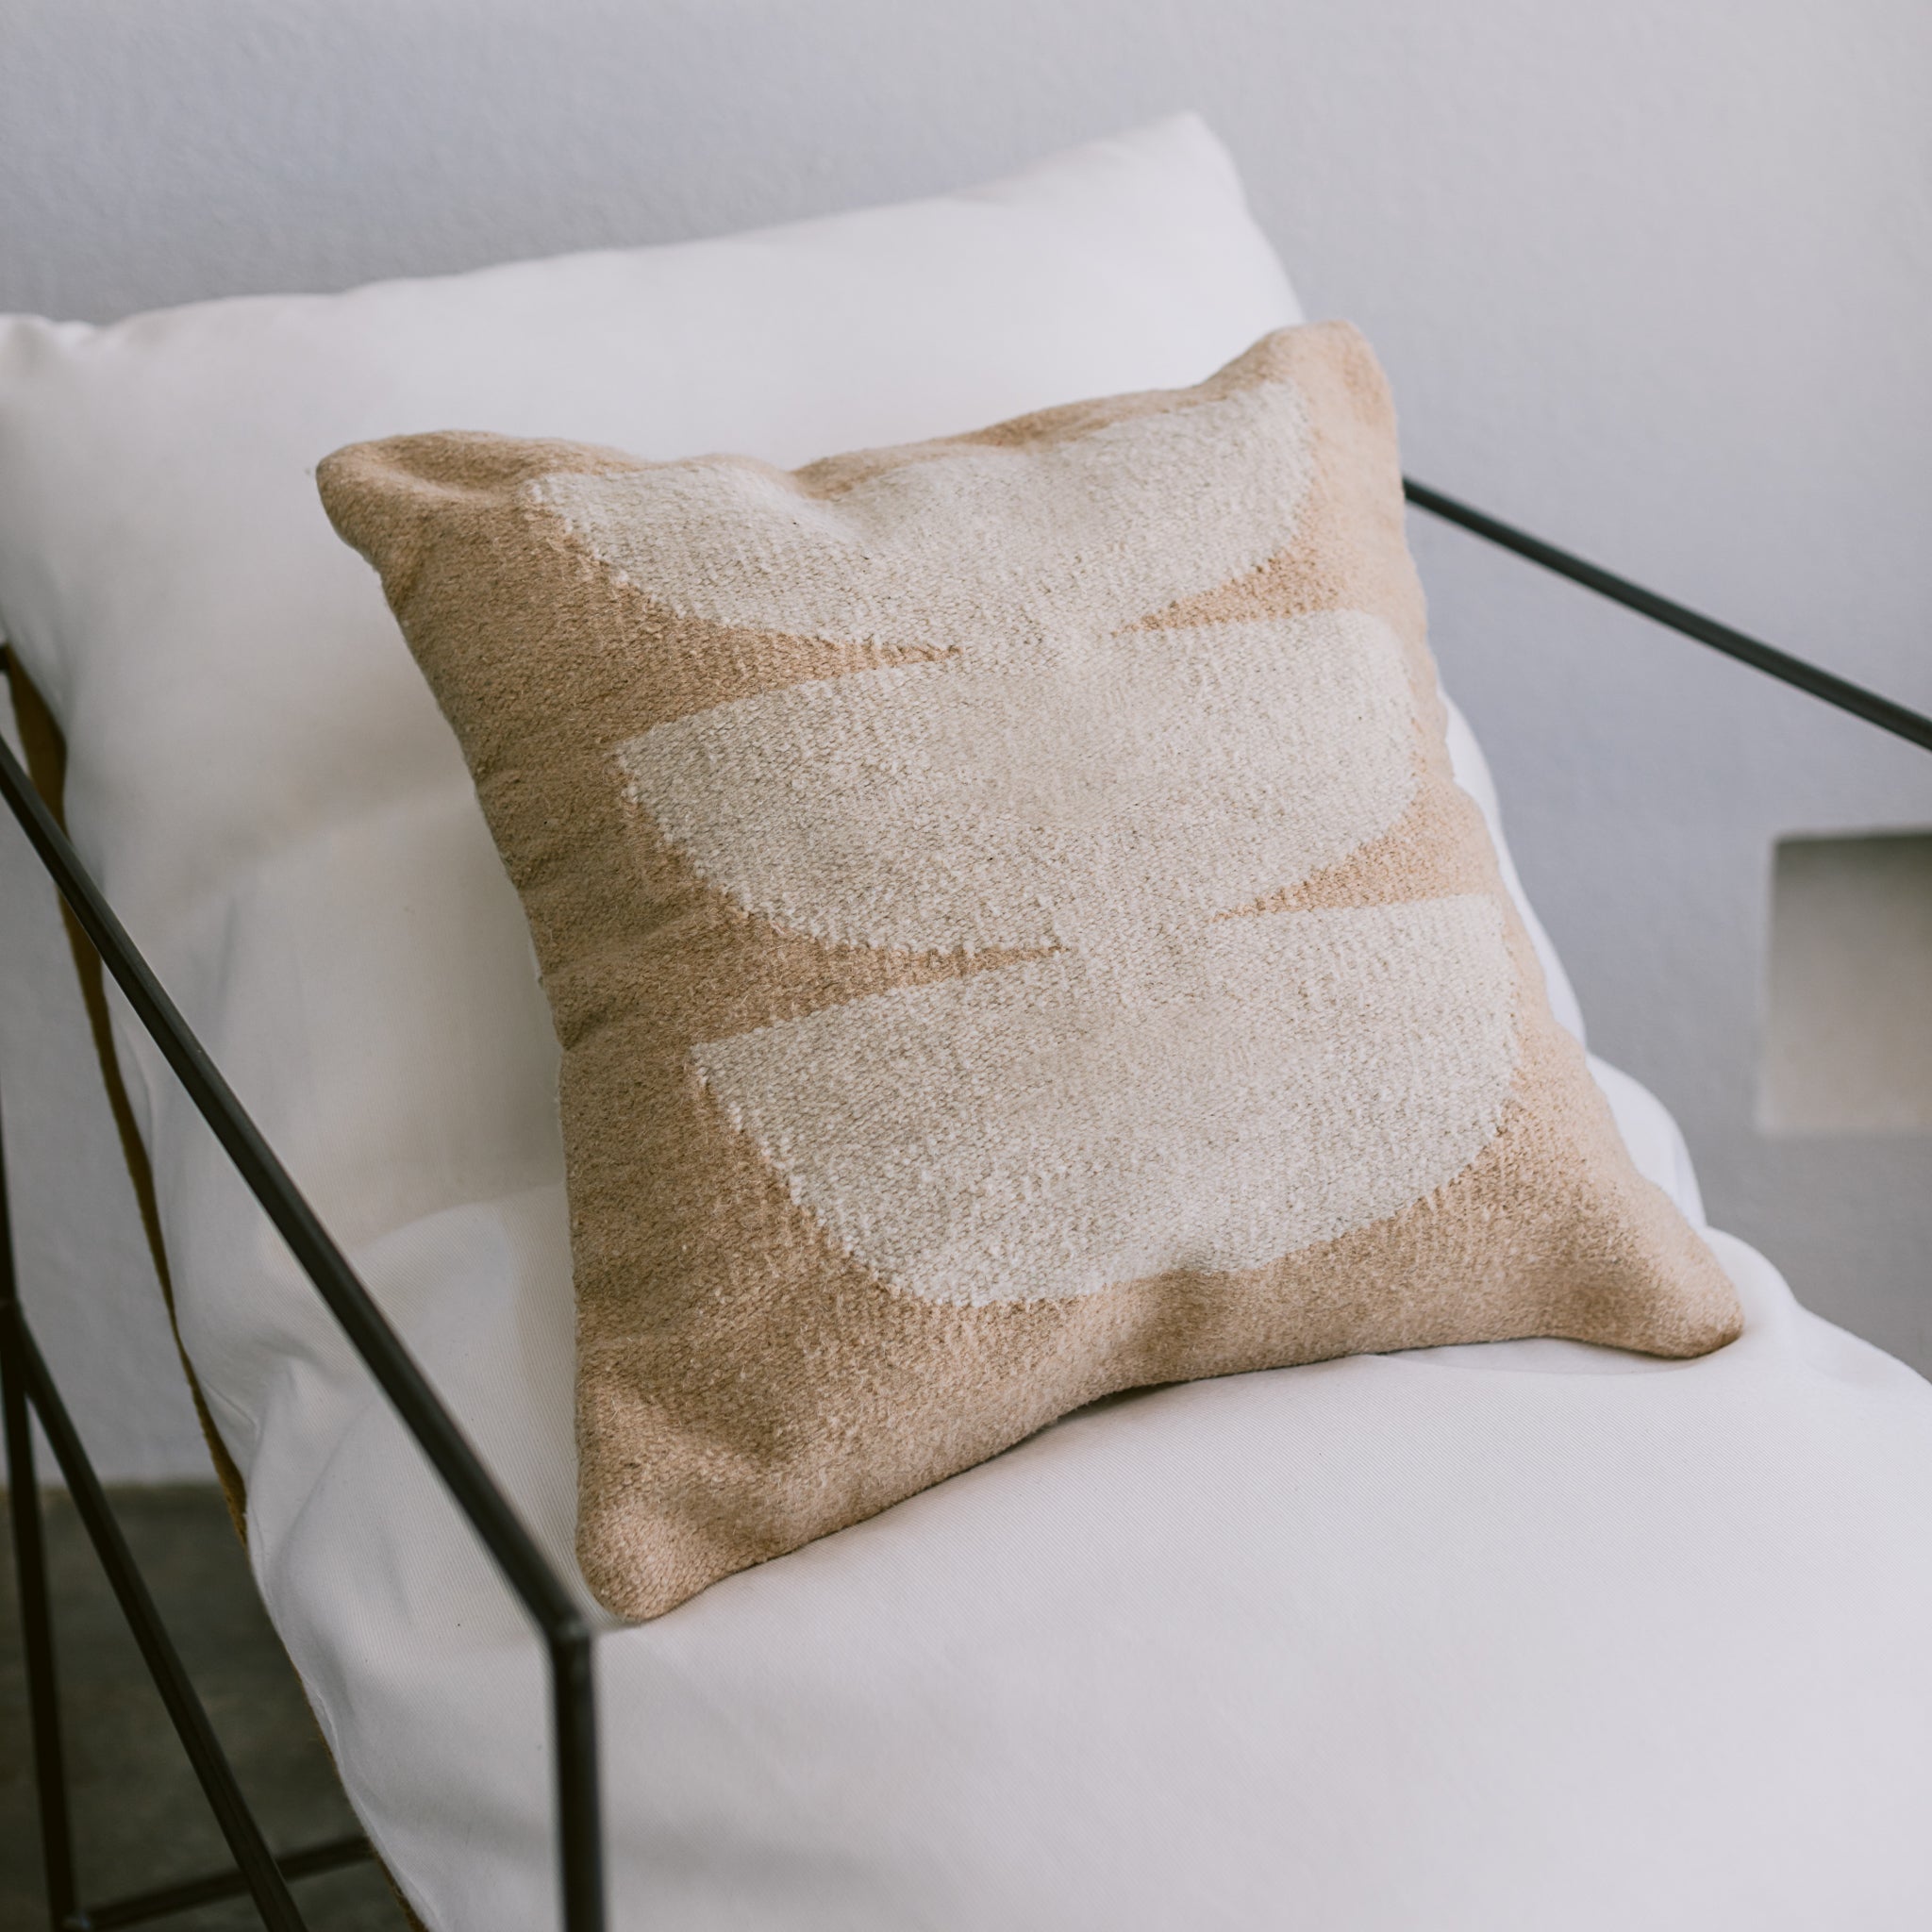 A wool ivory and beige-colored throw pillow on a white chair.